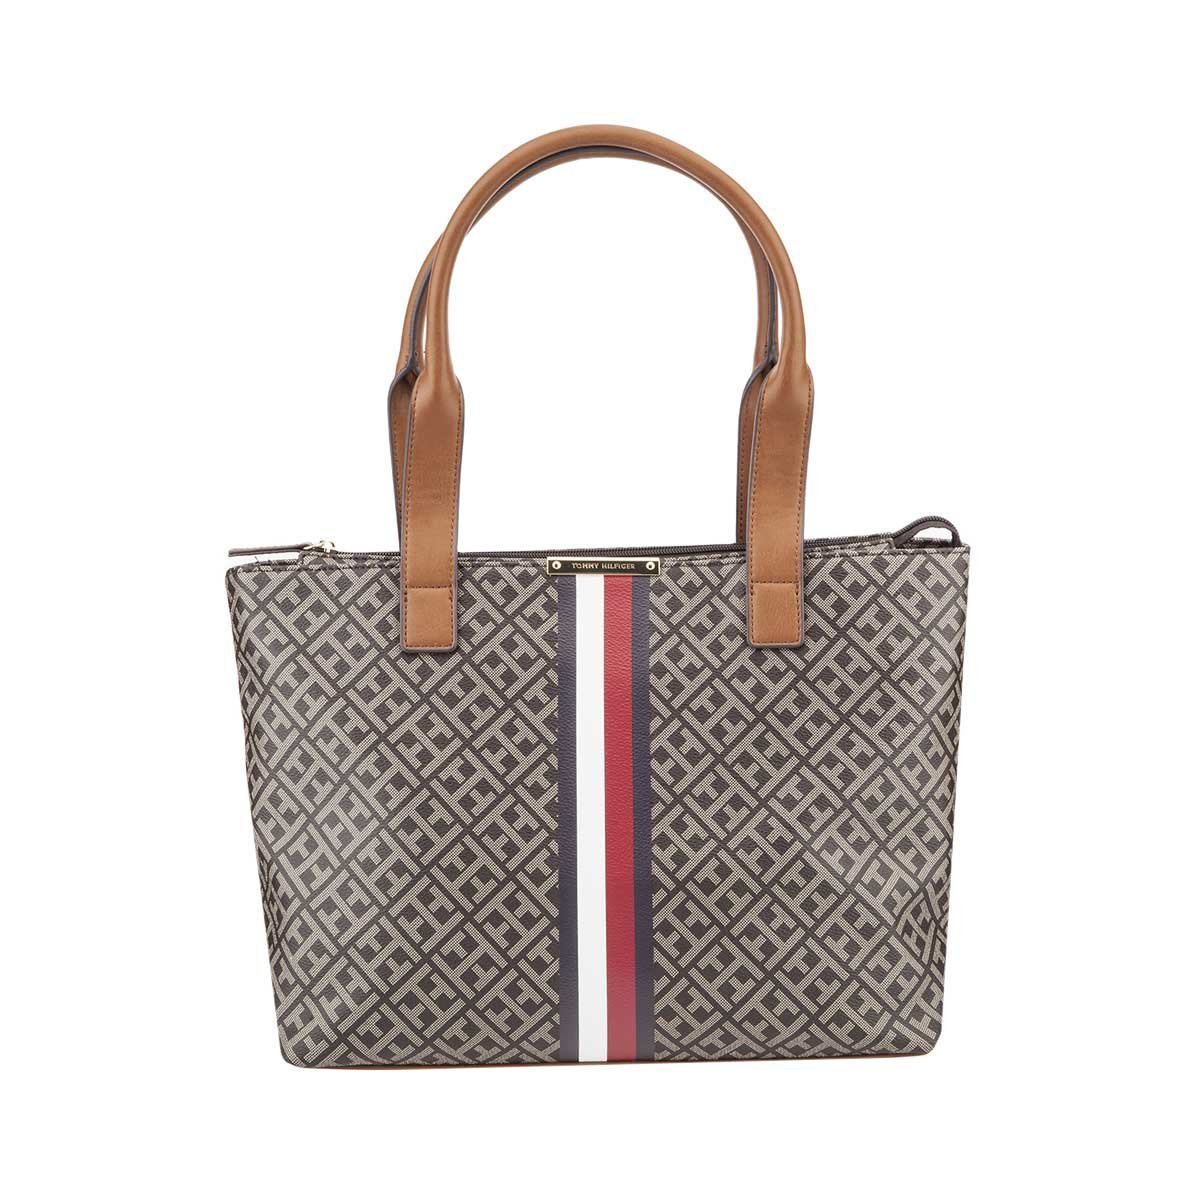 Bolso Tipo Tote Tommy Hilfiger